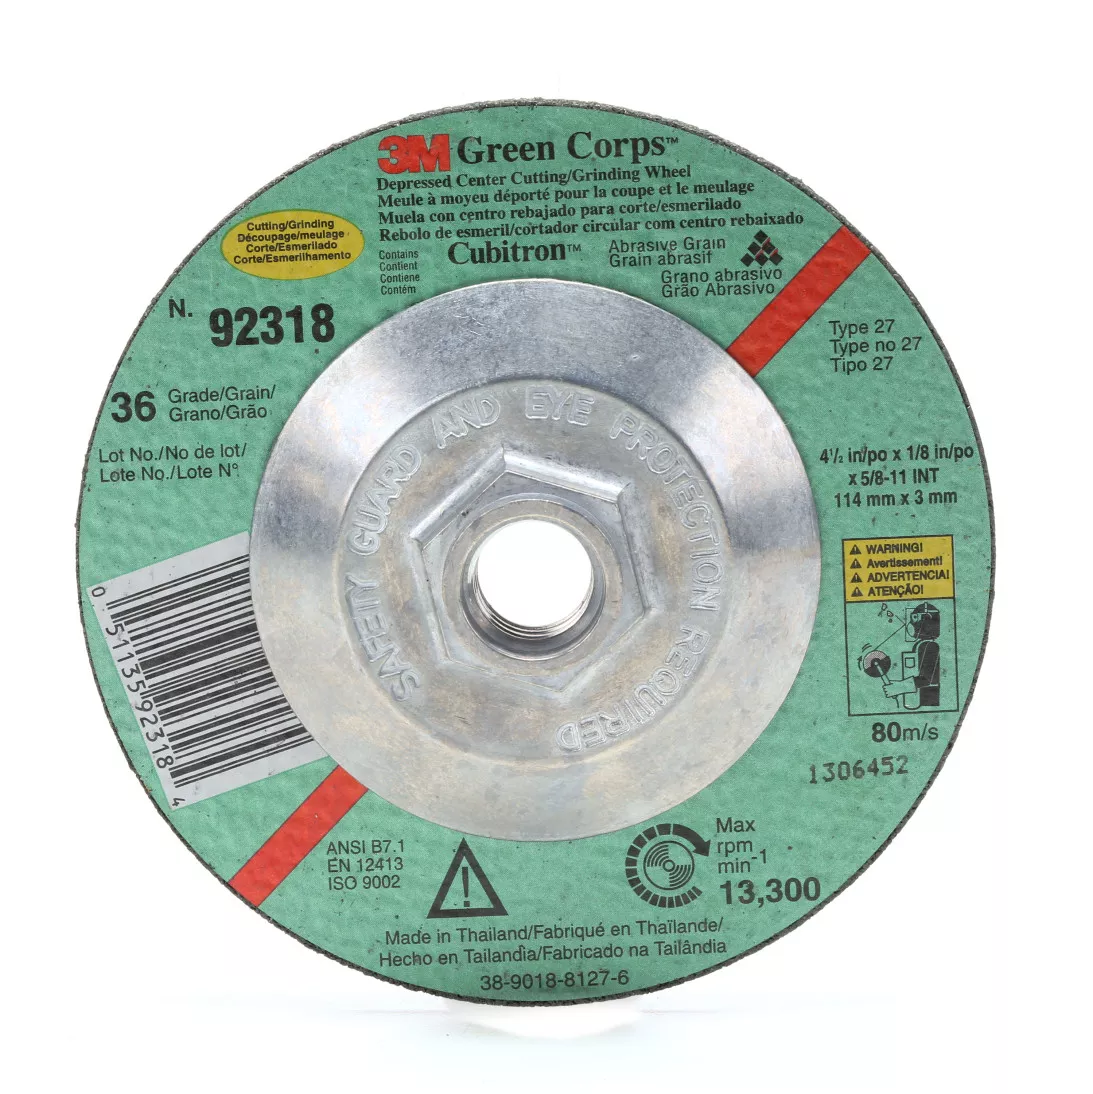 3M™ Green Corps™ Cutting/Grinding Wheel, T27, 7 in x 1/8 in x 7/8, 36,
20 ea/Case